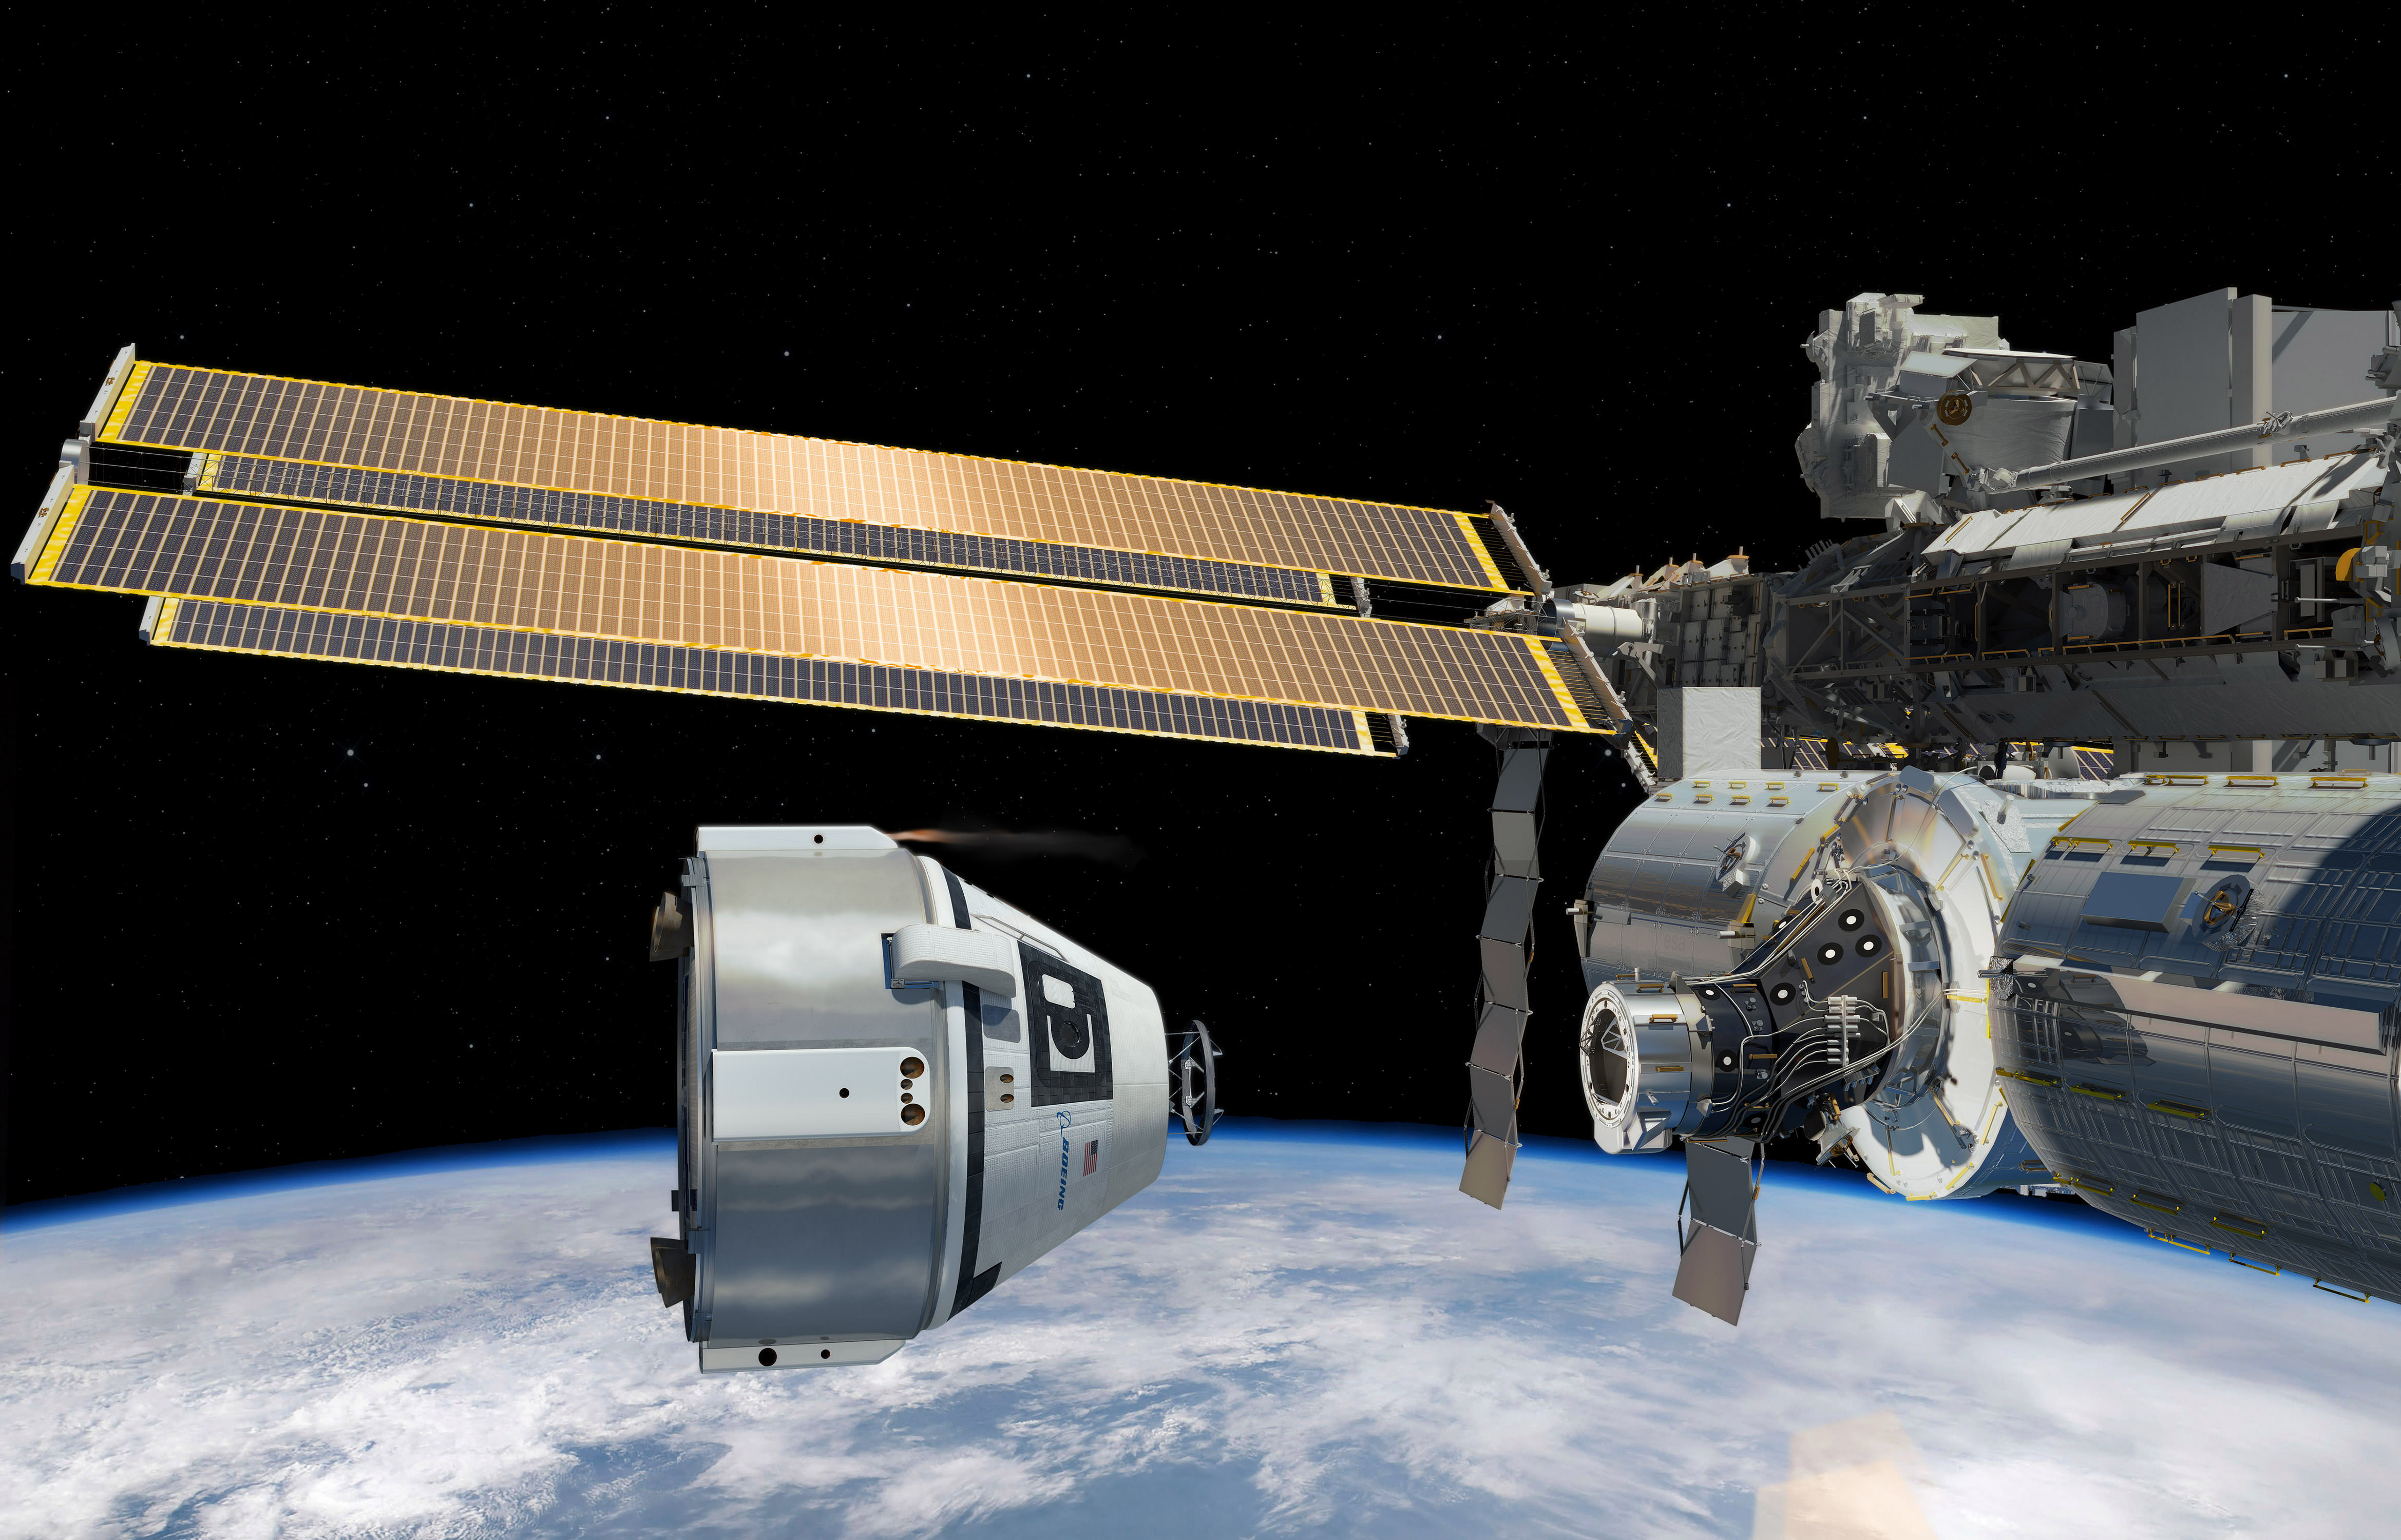 Boeing was awarded the first service flight of the CST-100 crew capsule to the International Space Station as part of the Commercial Crew Transportation Capability agreement with NASA in this artists concept.  Credit: Boeing